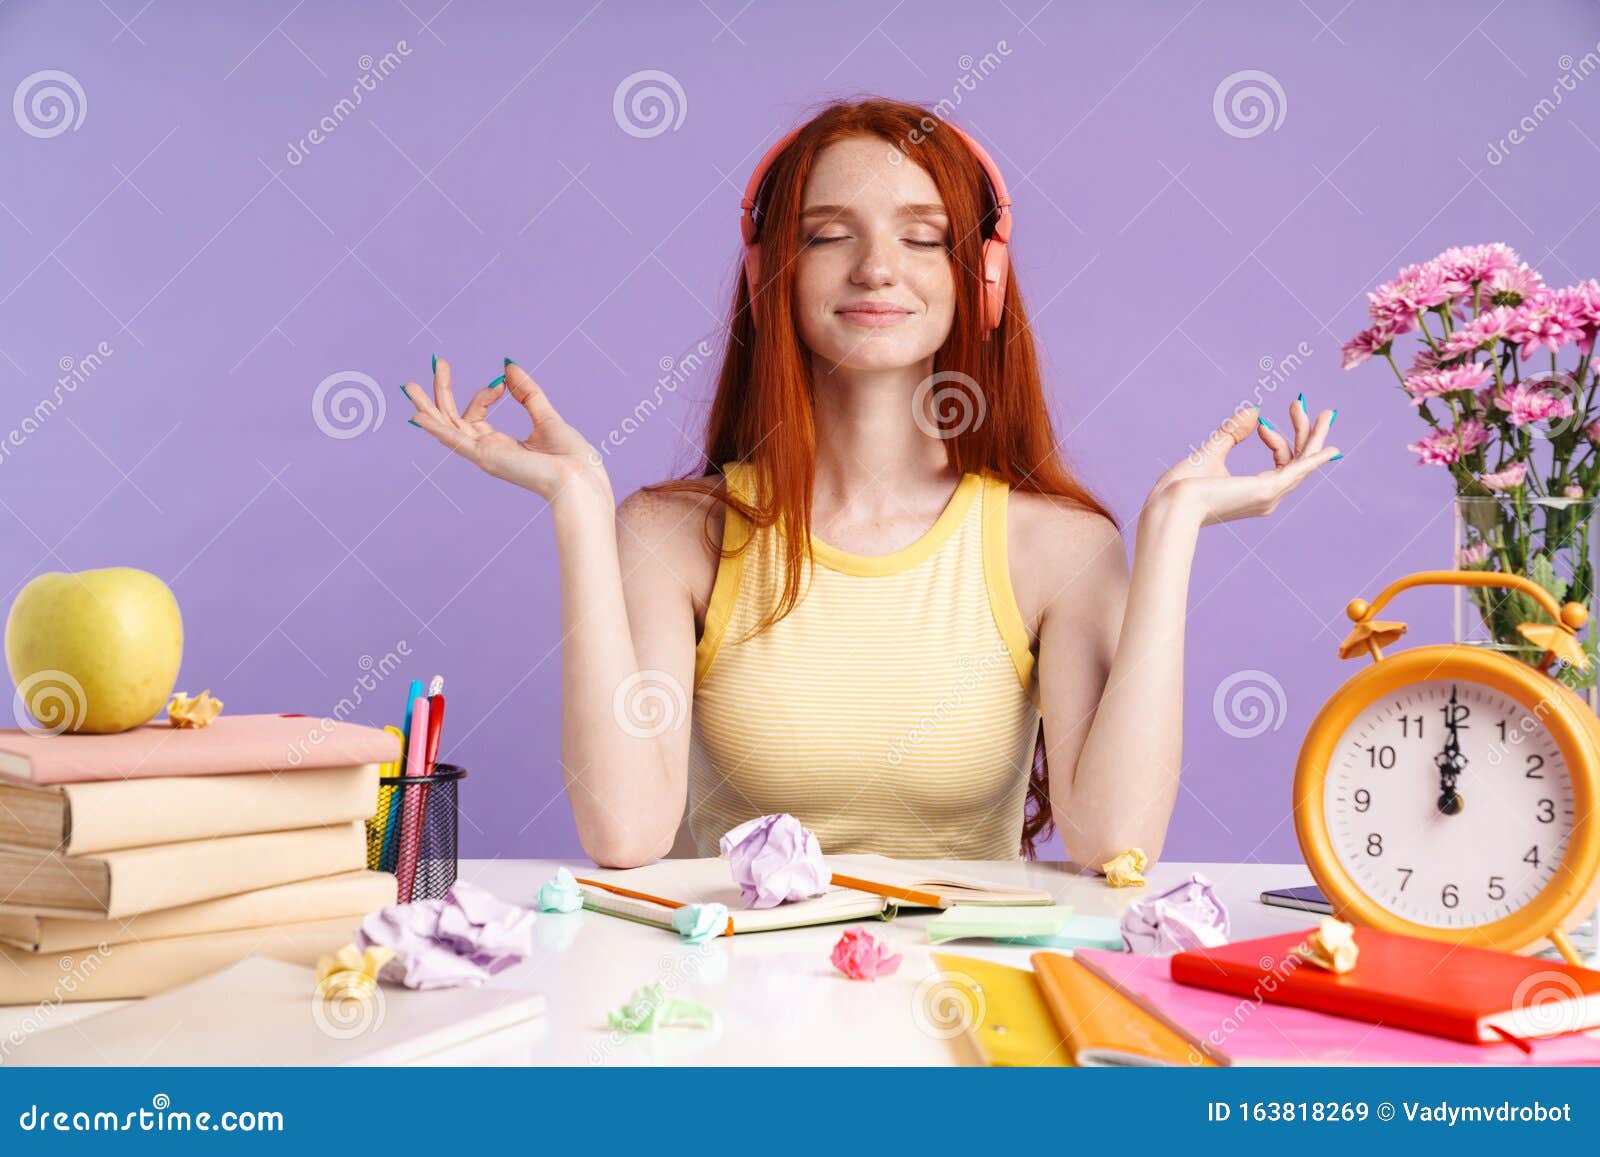 Photo Of Relaxed Student Girl In Headphones Sitting At Desk With